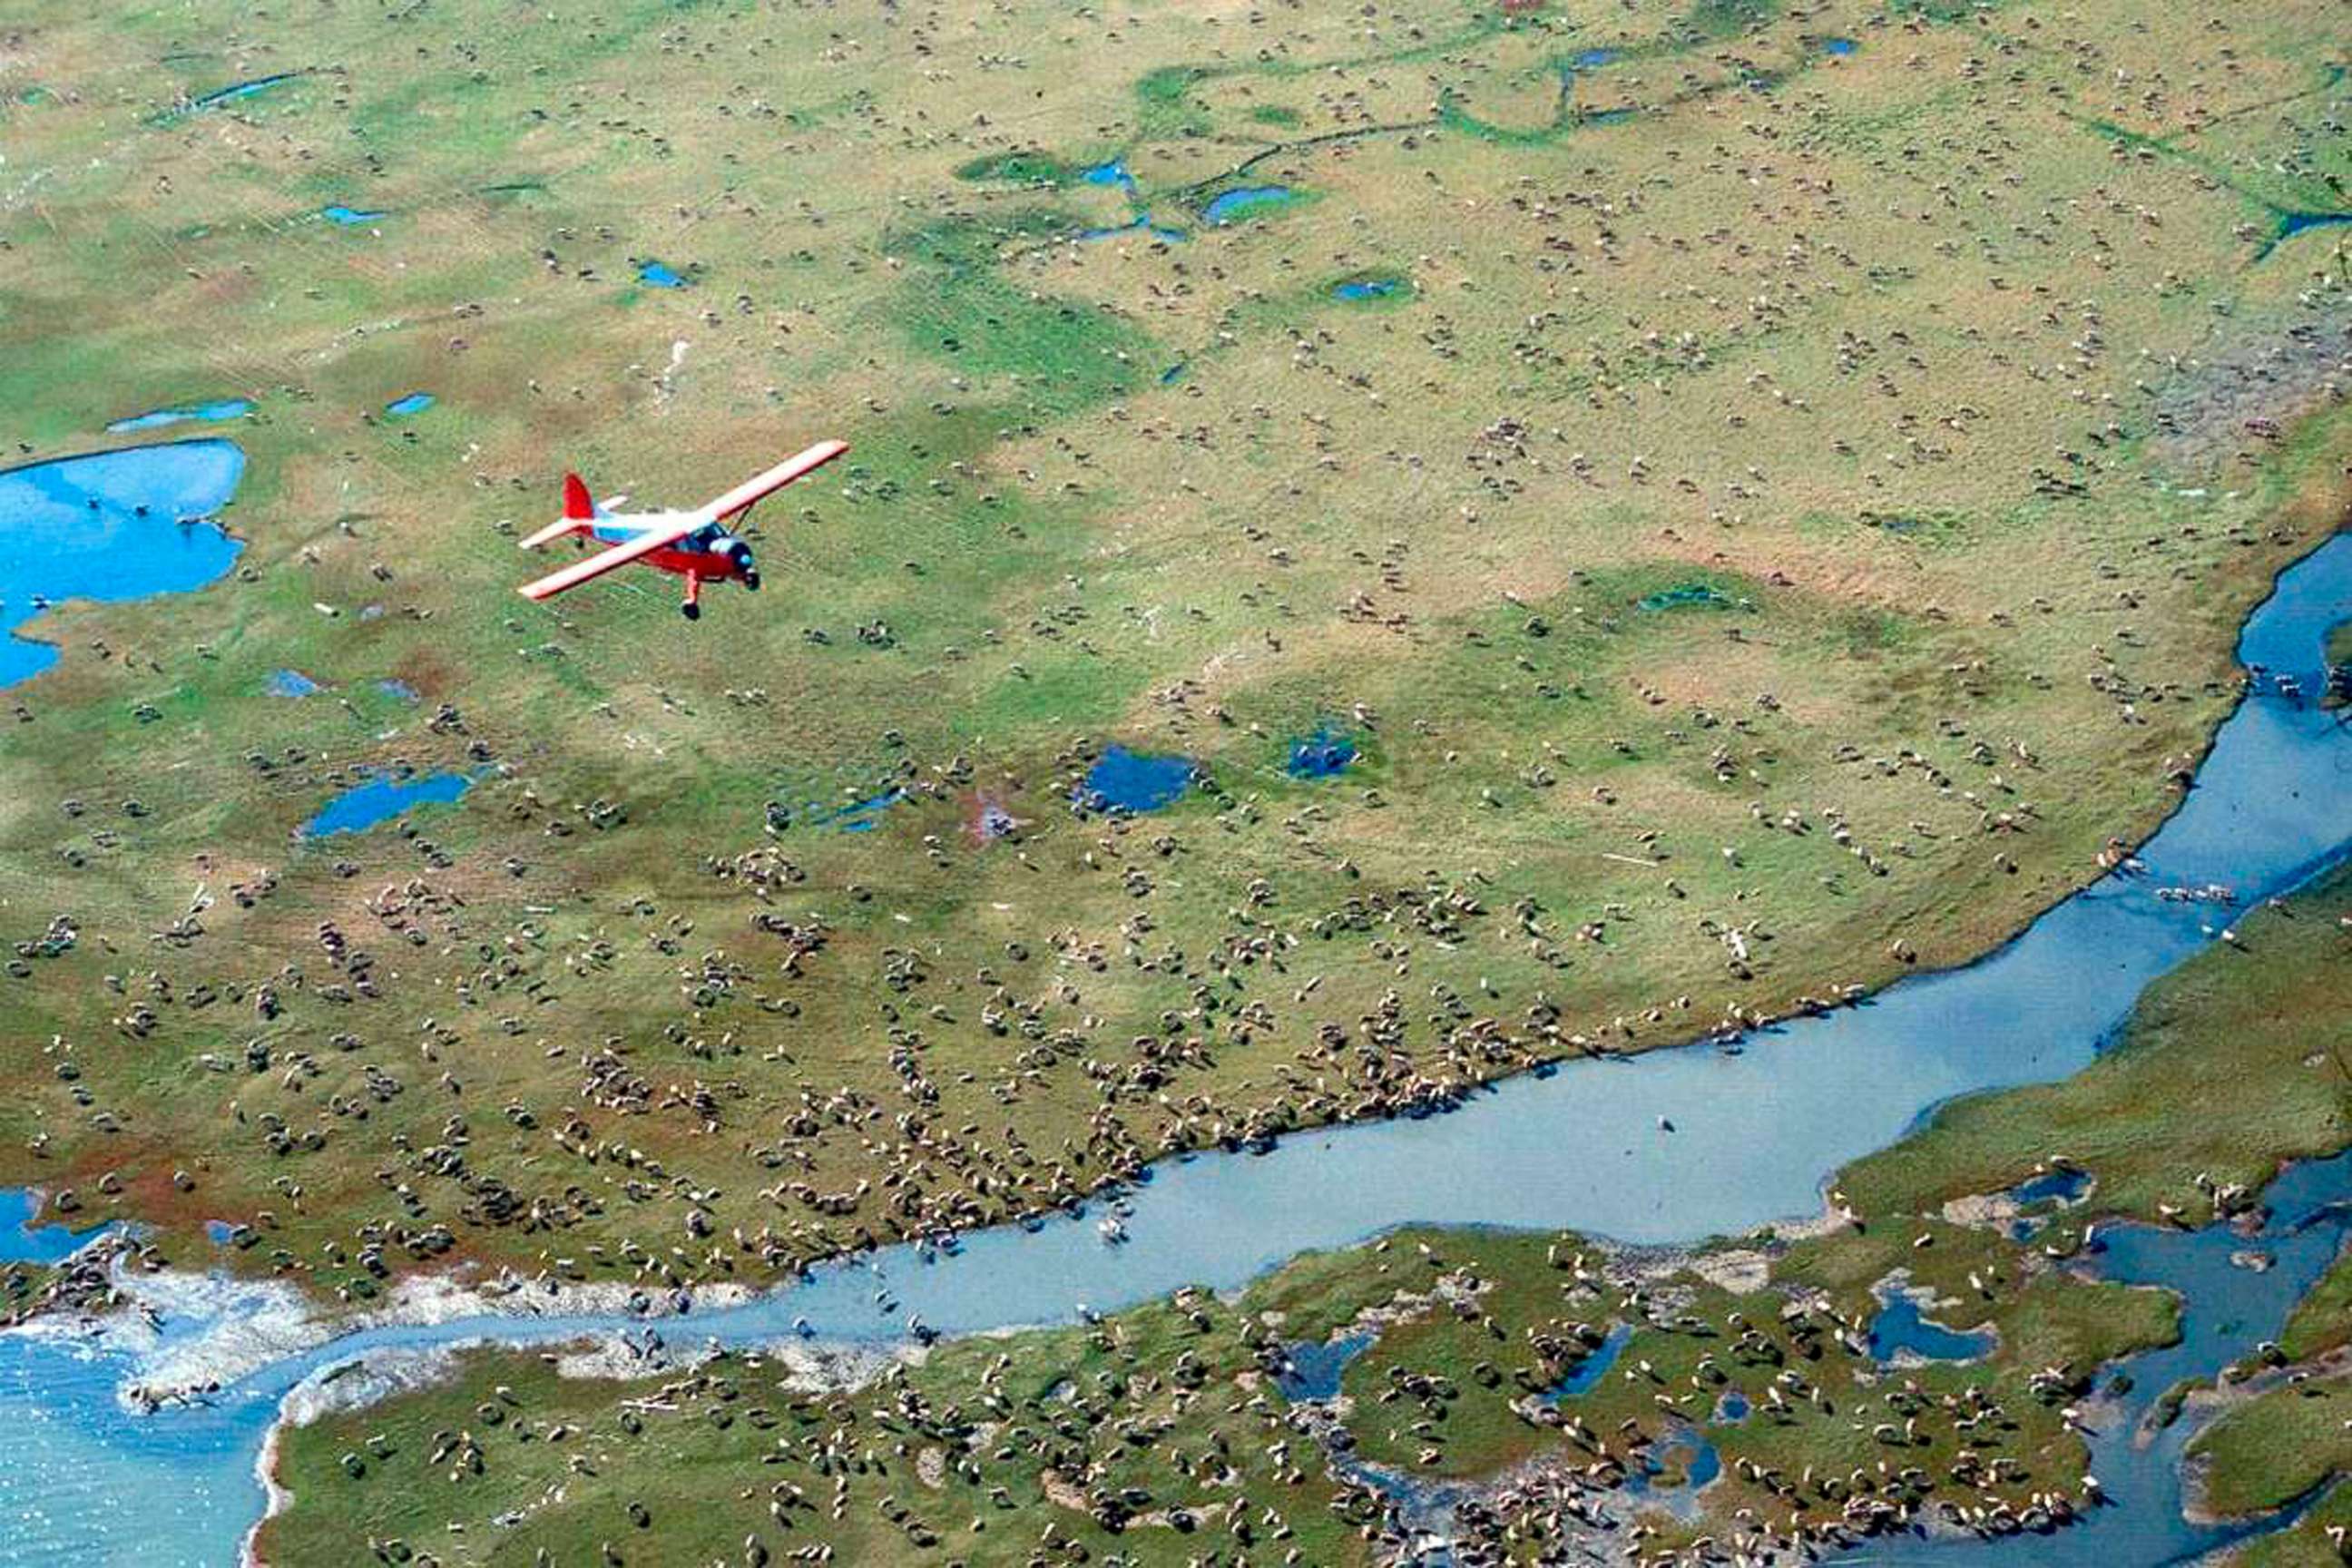 PHOTO: In this undated photo provided by the U.S. Fish and Wildlife Service, an airplane flies over caribou from the Porcupine Caribou Herd on the coastal plain of the Arctic National Wildlife Refuge in northeast Alaska.